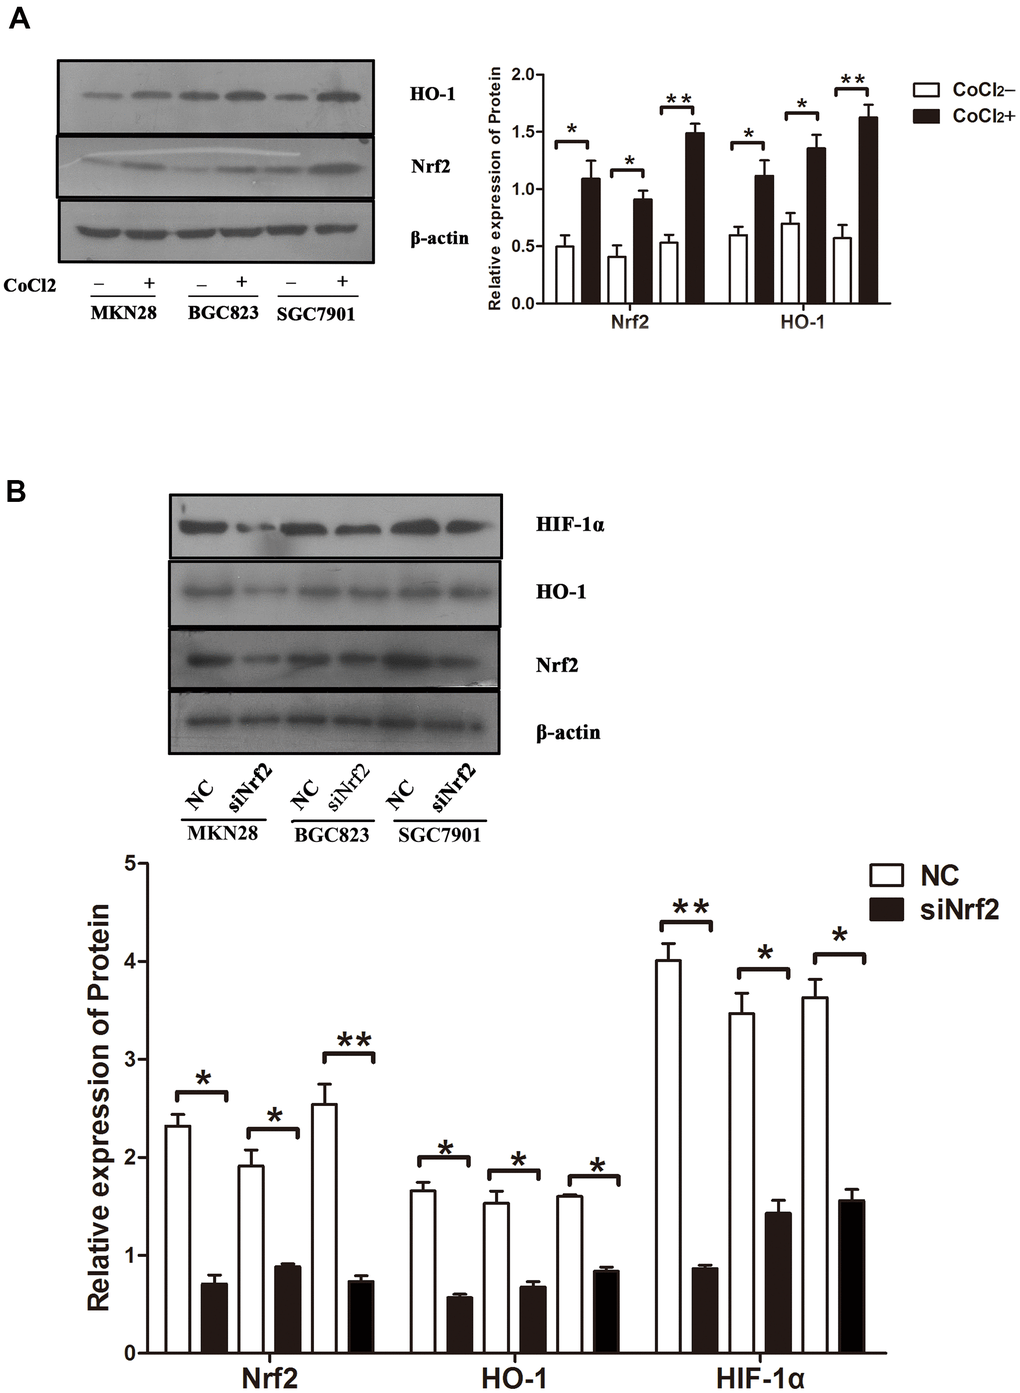 Protein expression under different conditions (A) Expression of Nrf2 and HO-1 in GC cells cultured under a hypoxic condition. The graphs show the quantified data of western blots. (B) Expression of Nrf2, HO-1 and HIF-1α in GC cells after they were transfected with siRNAs and cultured under a hypoxic condition. The graphs show the quantified data of western blot. (*P